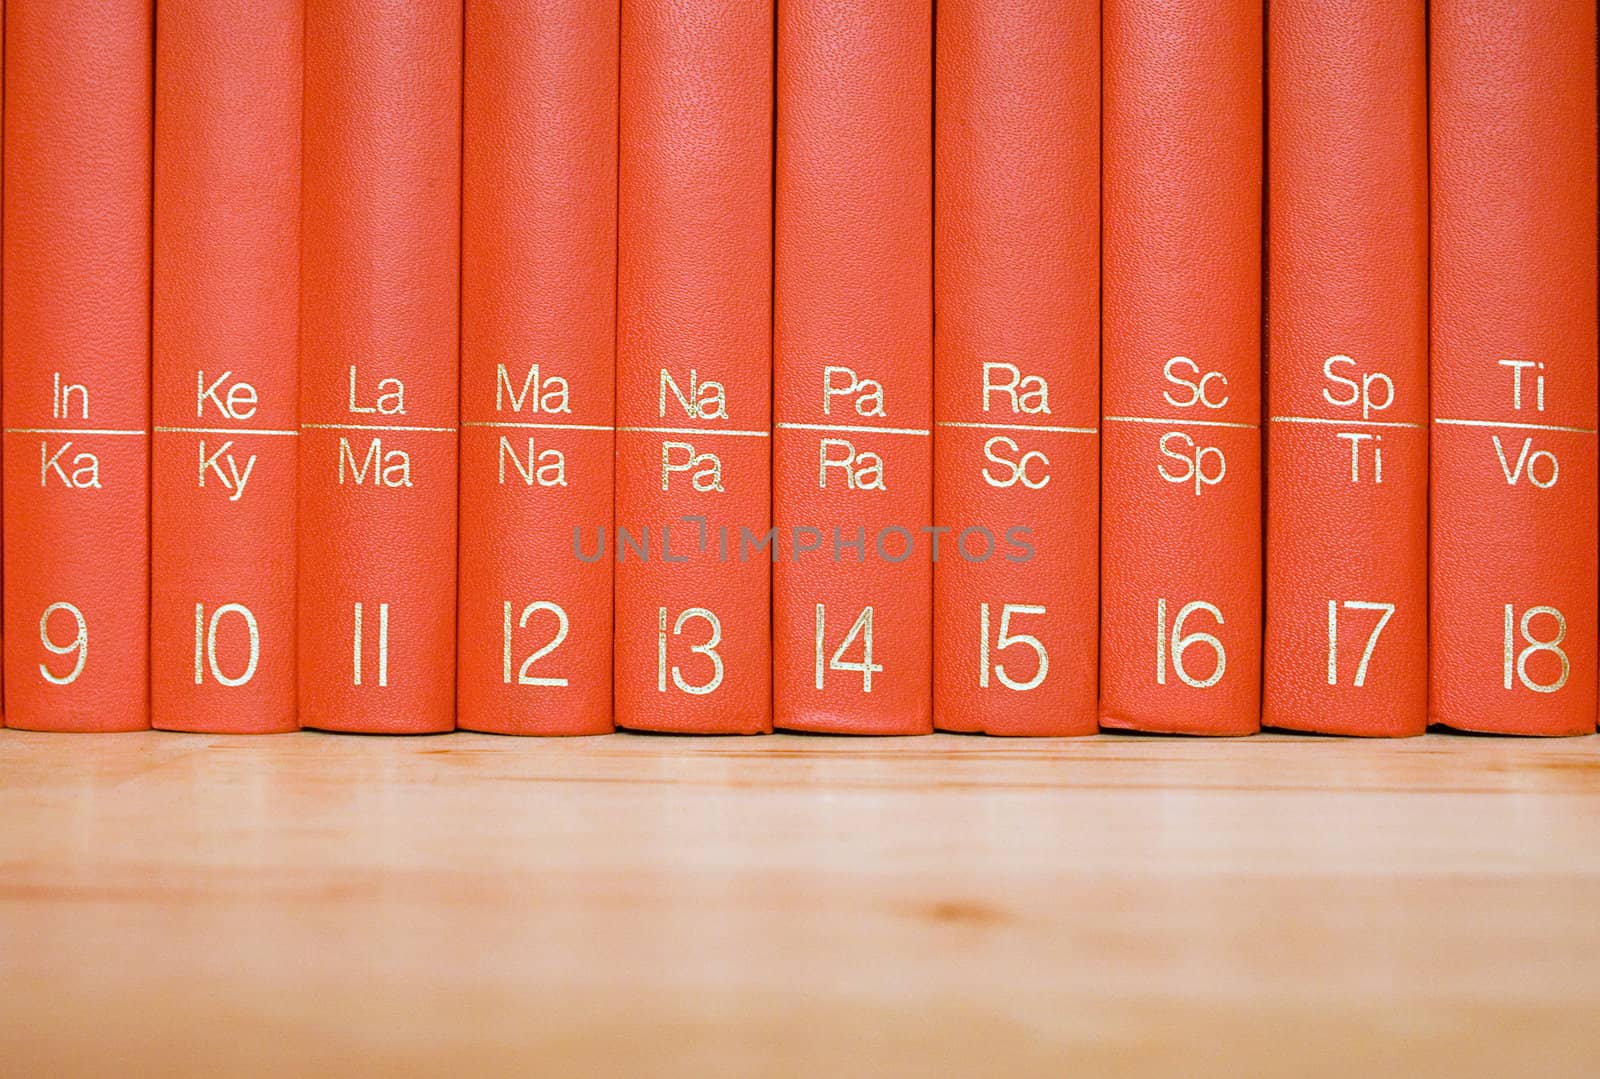 Close view on red books standing in a wooden bookshelf.